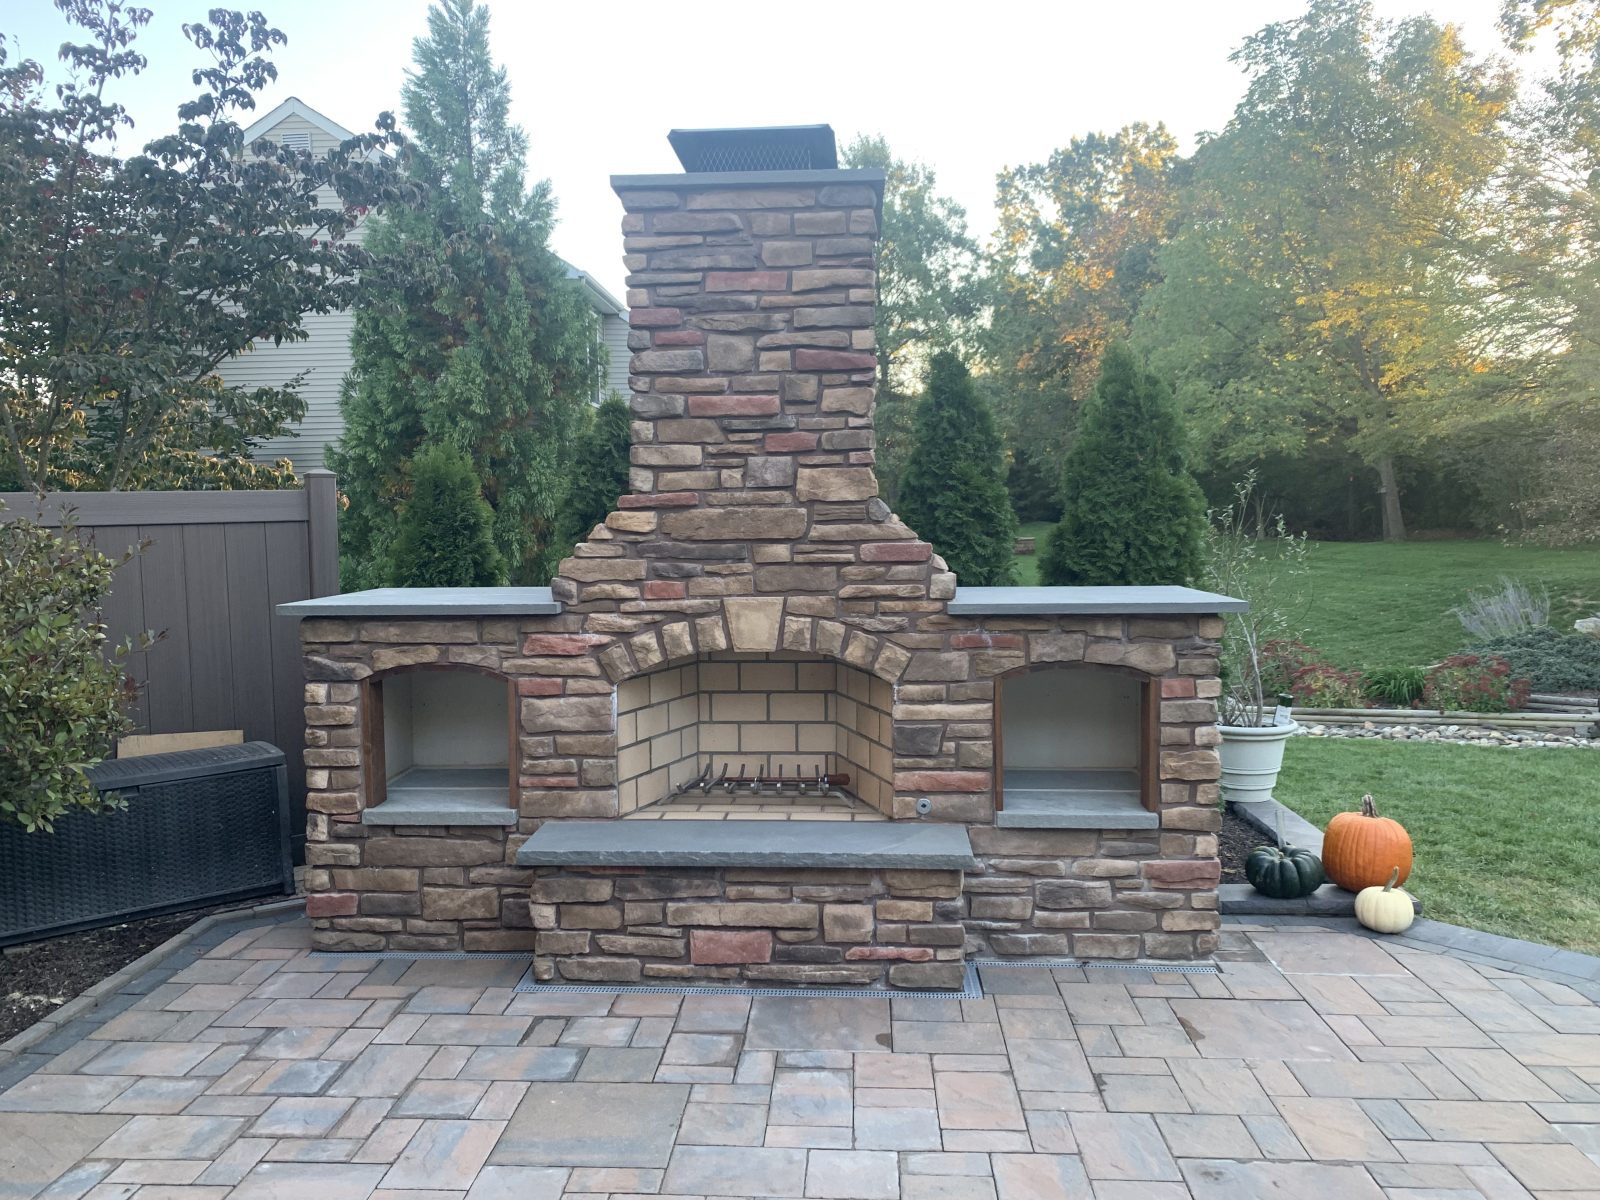 DIY Outdoor Kitchen Inspiration & Brick Ovens - Round Grove Products